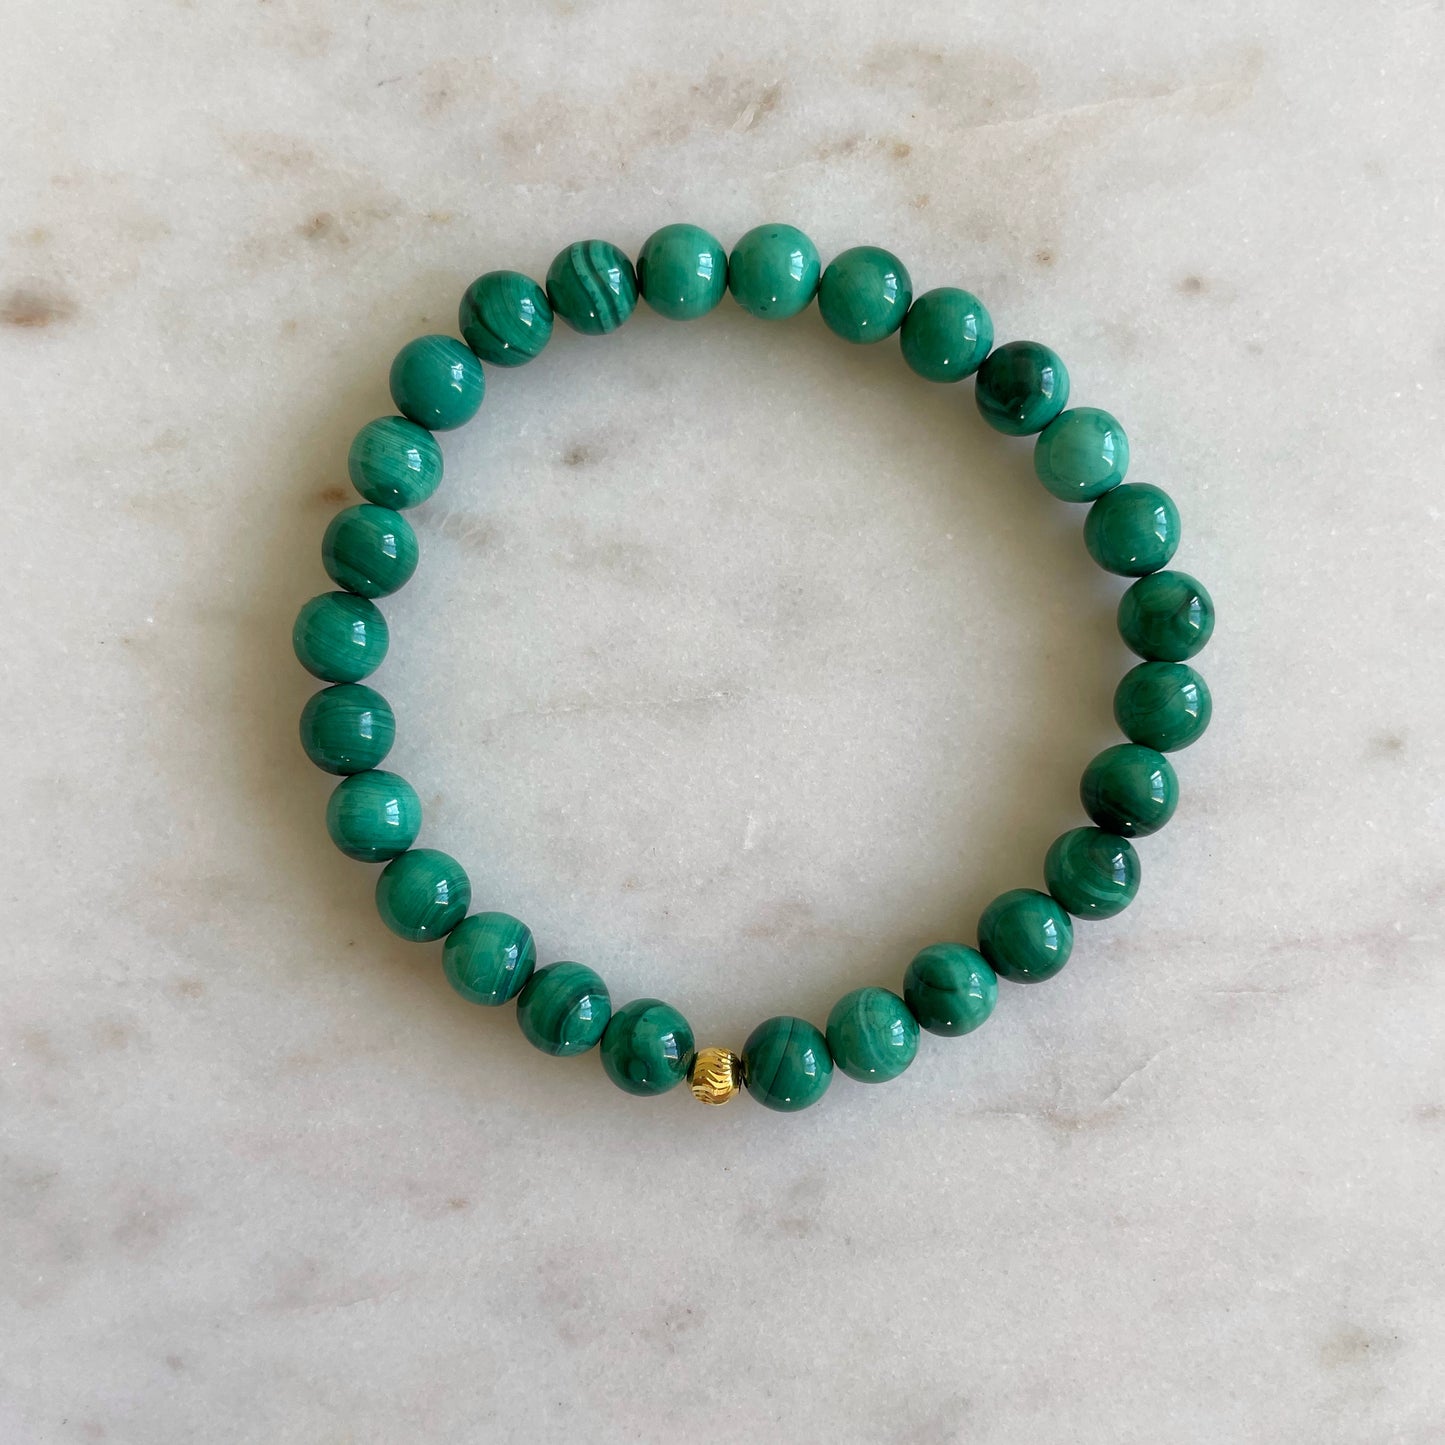 Full Moon - Malachite bracelet for luck and positive transformation